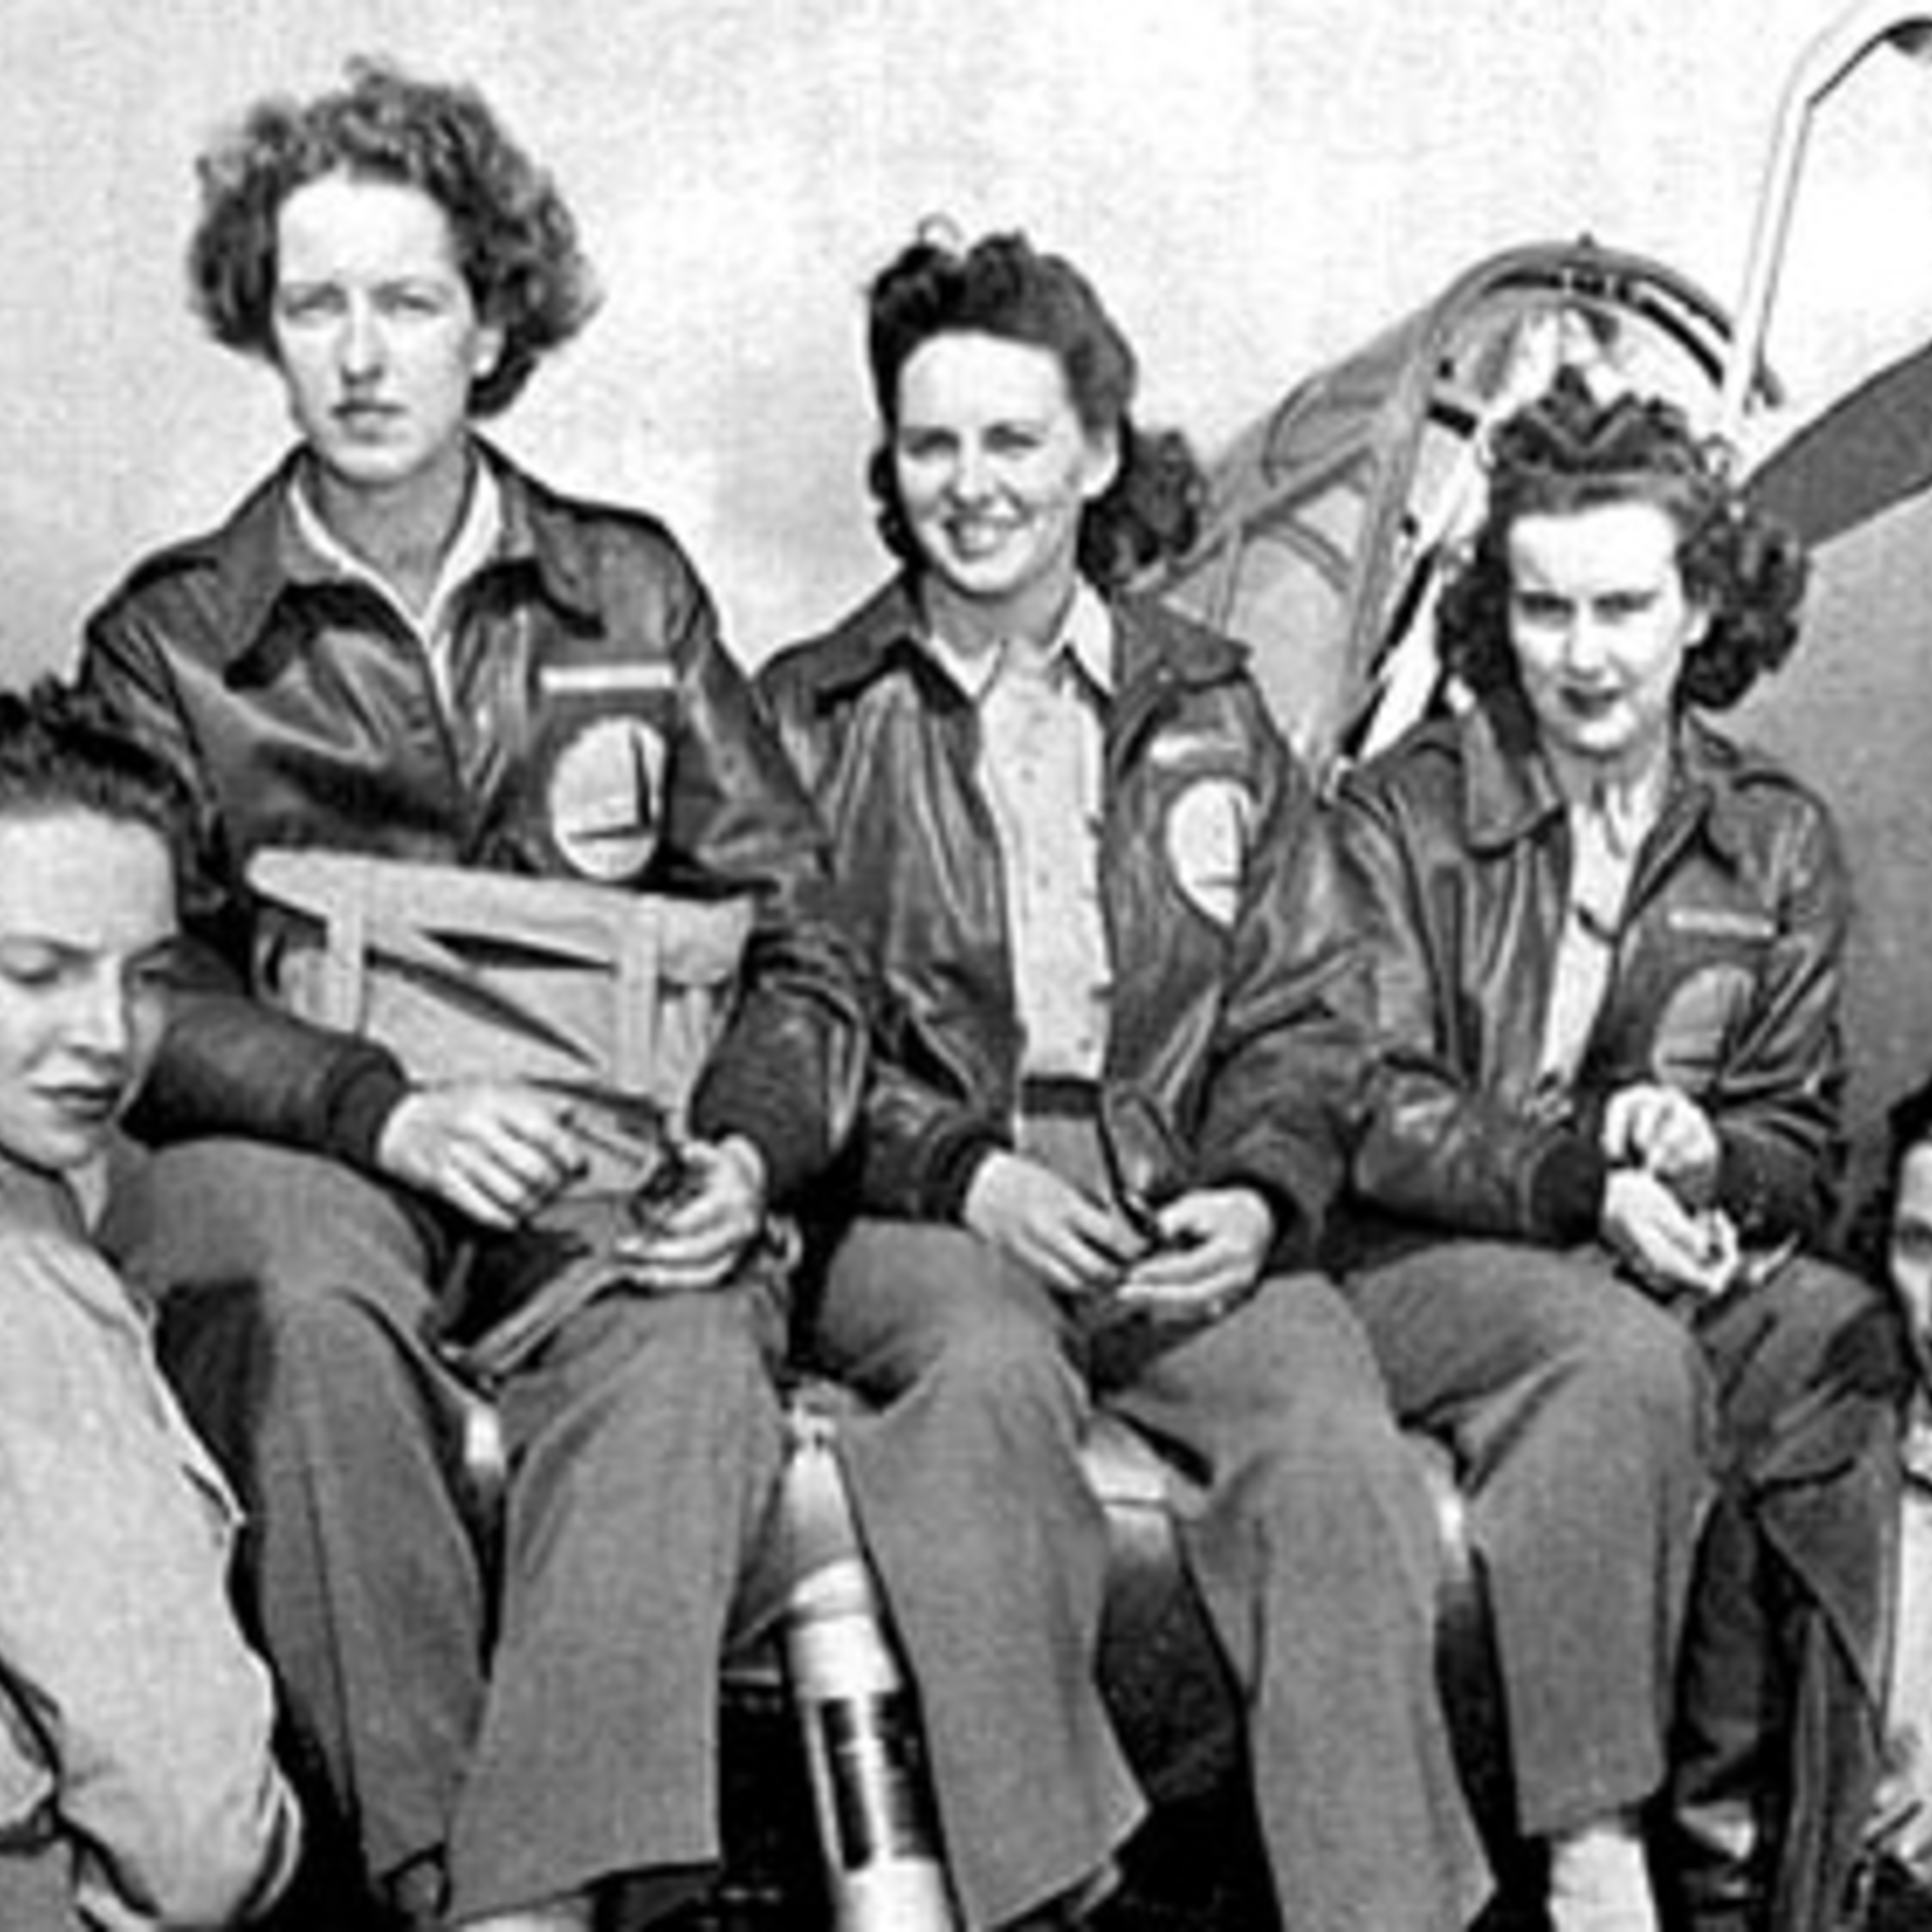 Women's_Auxiliary_Ferrying_Squadron_pilots,_March_7,_1943.jpg